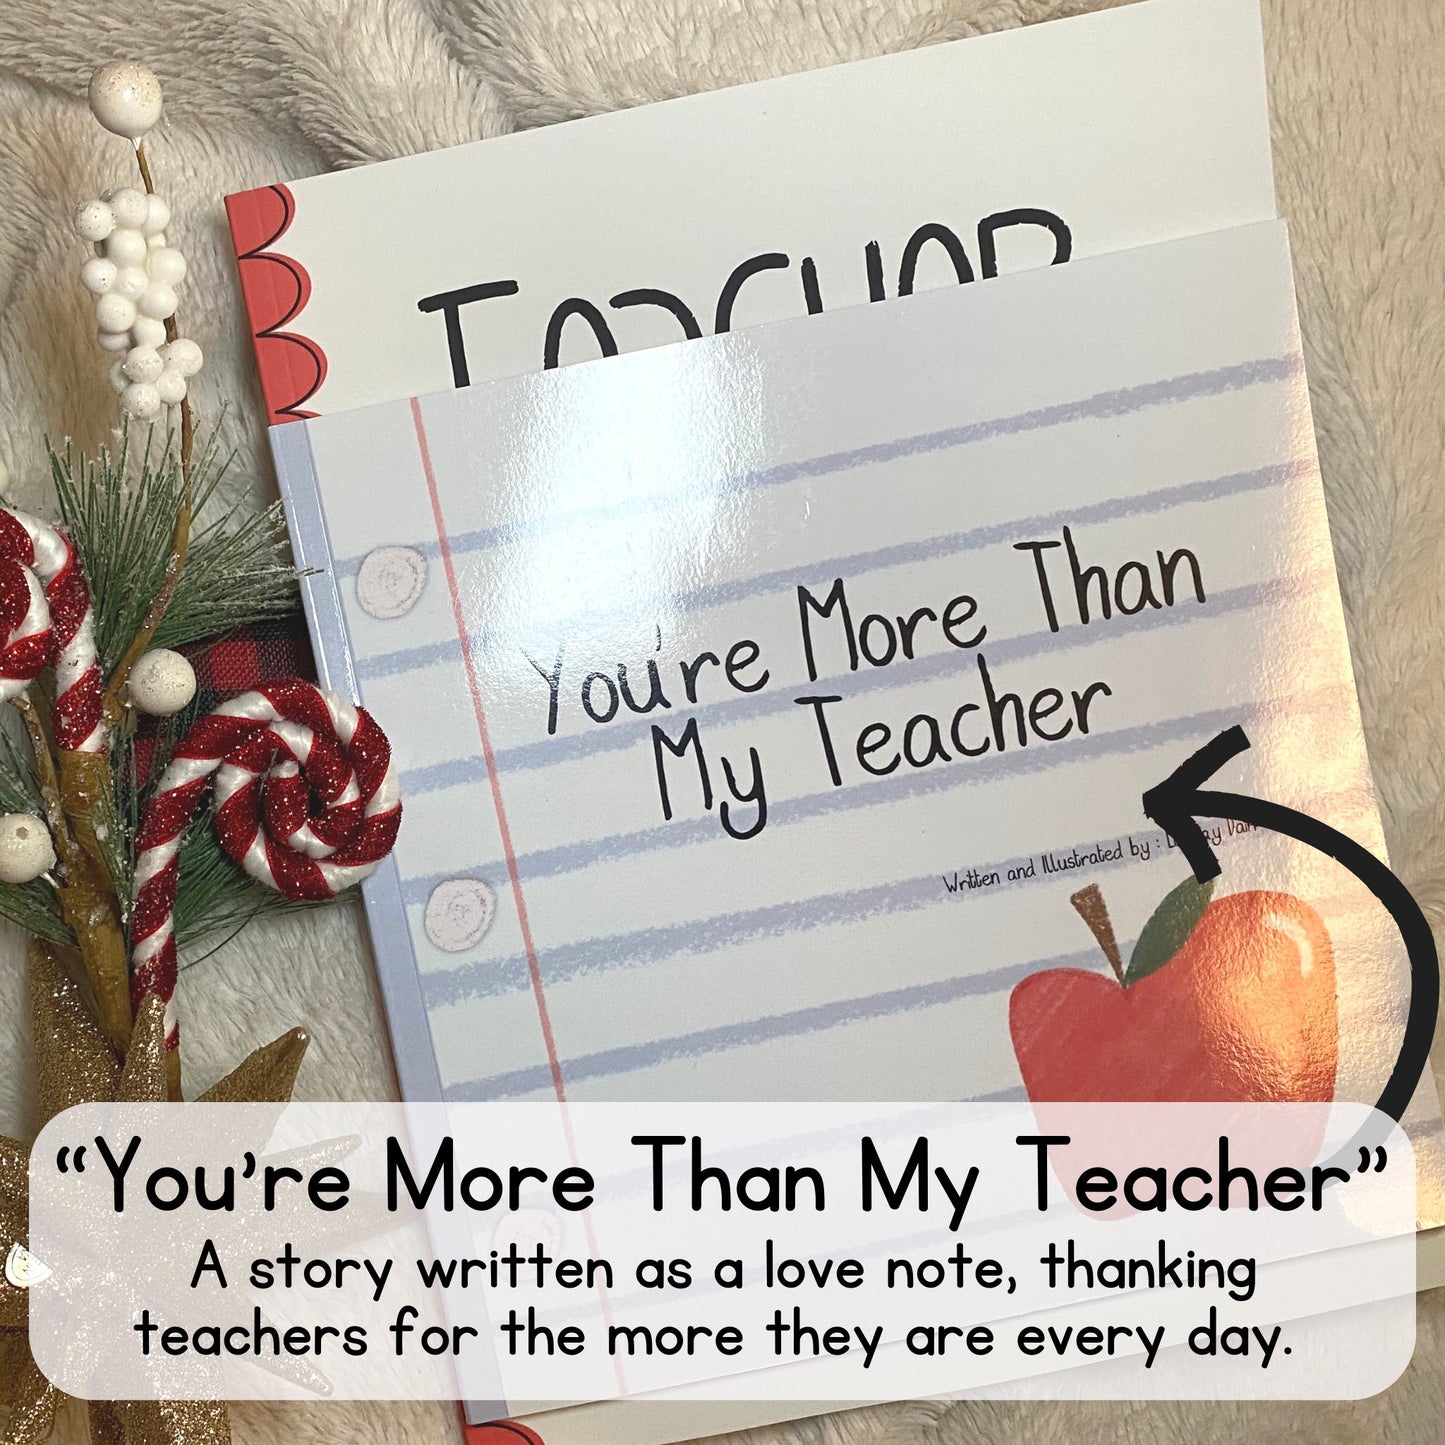 Image sharing the heart behind the book, "You're More Than My Teacher" a love note in the autographed story thats included in the teacher gift set self published through Amazon KDP and Kindle Direct Publishing.